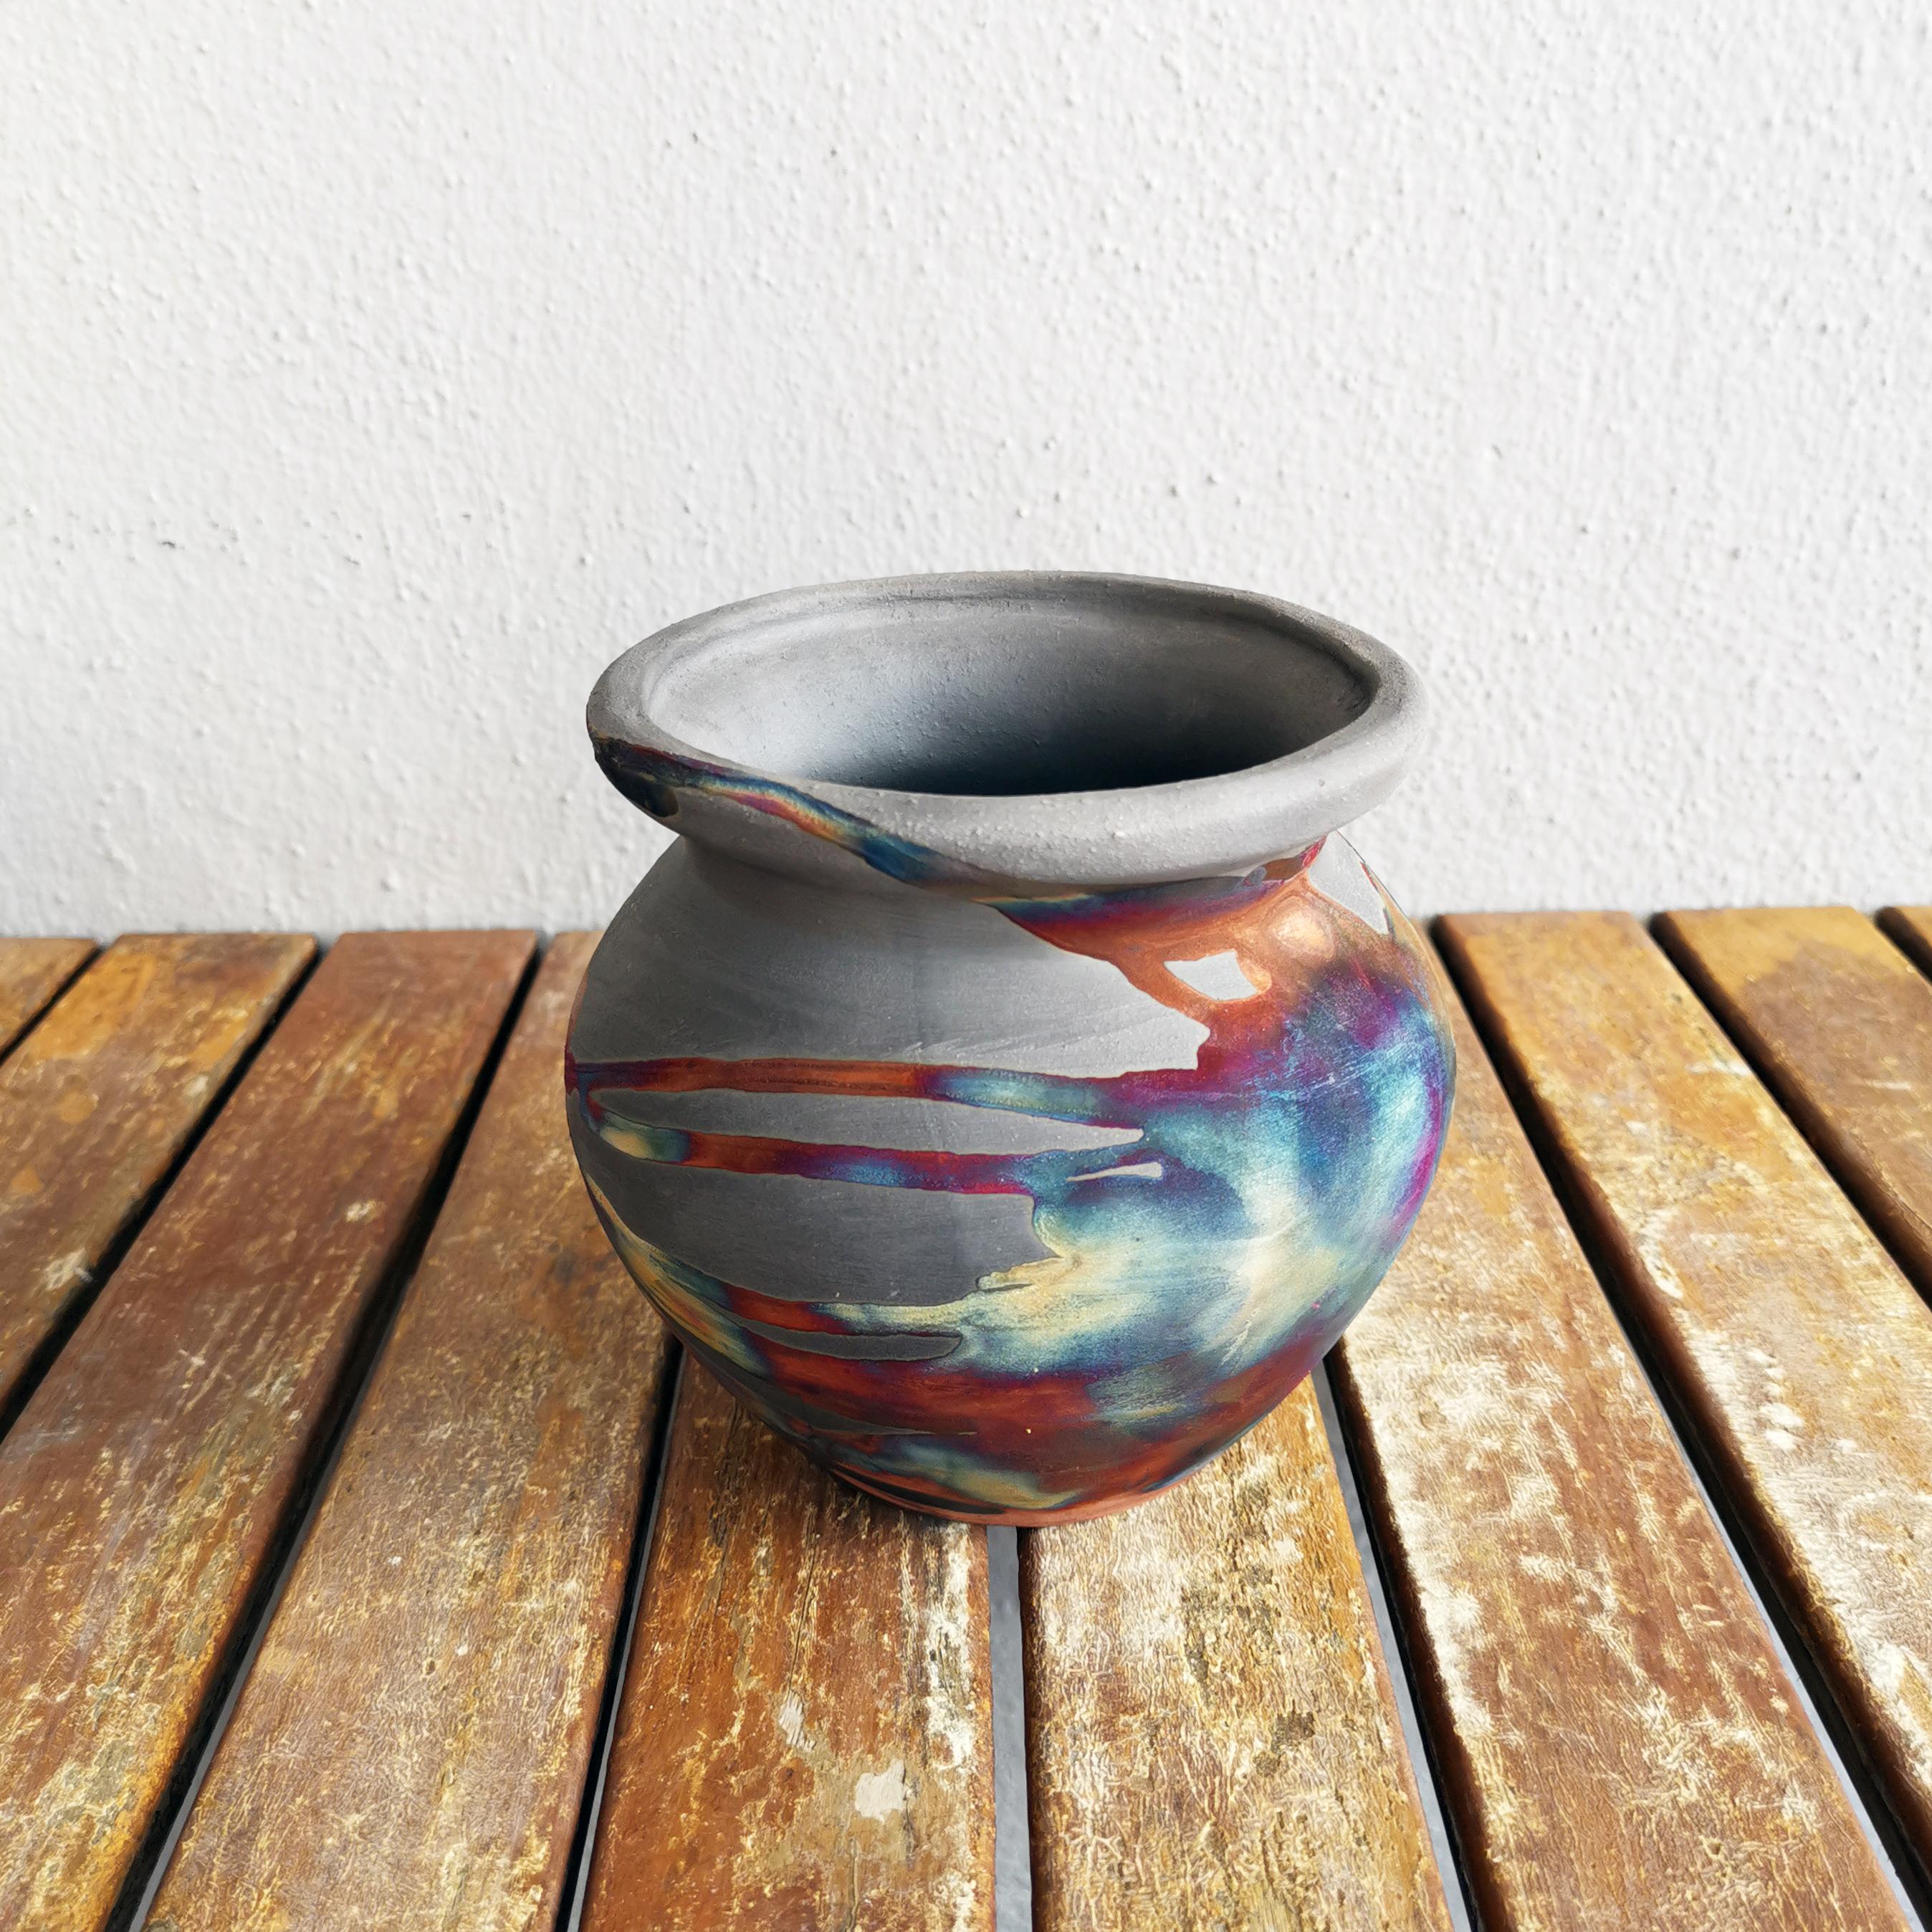 Hofu - ( 豊富 ) Abundance

The Hofu vase is a decorative wide lipped vessel. The organic curves and traditional silhouette gives it a modest but impactful presence on any surface. This vase can be used as a pen caddy and makes a perfect gift.

Item